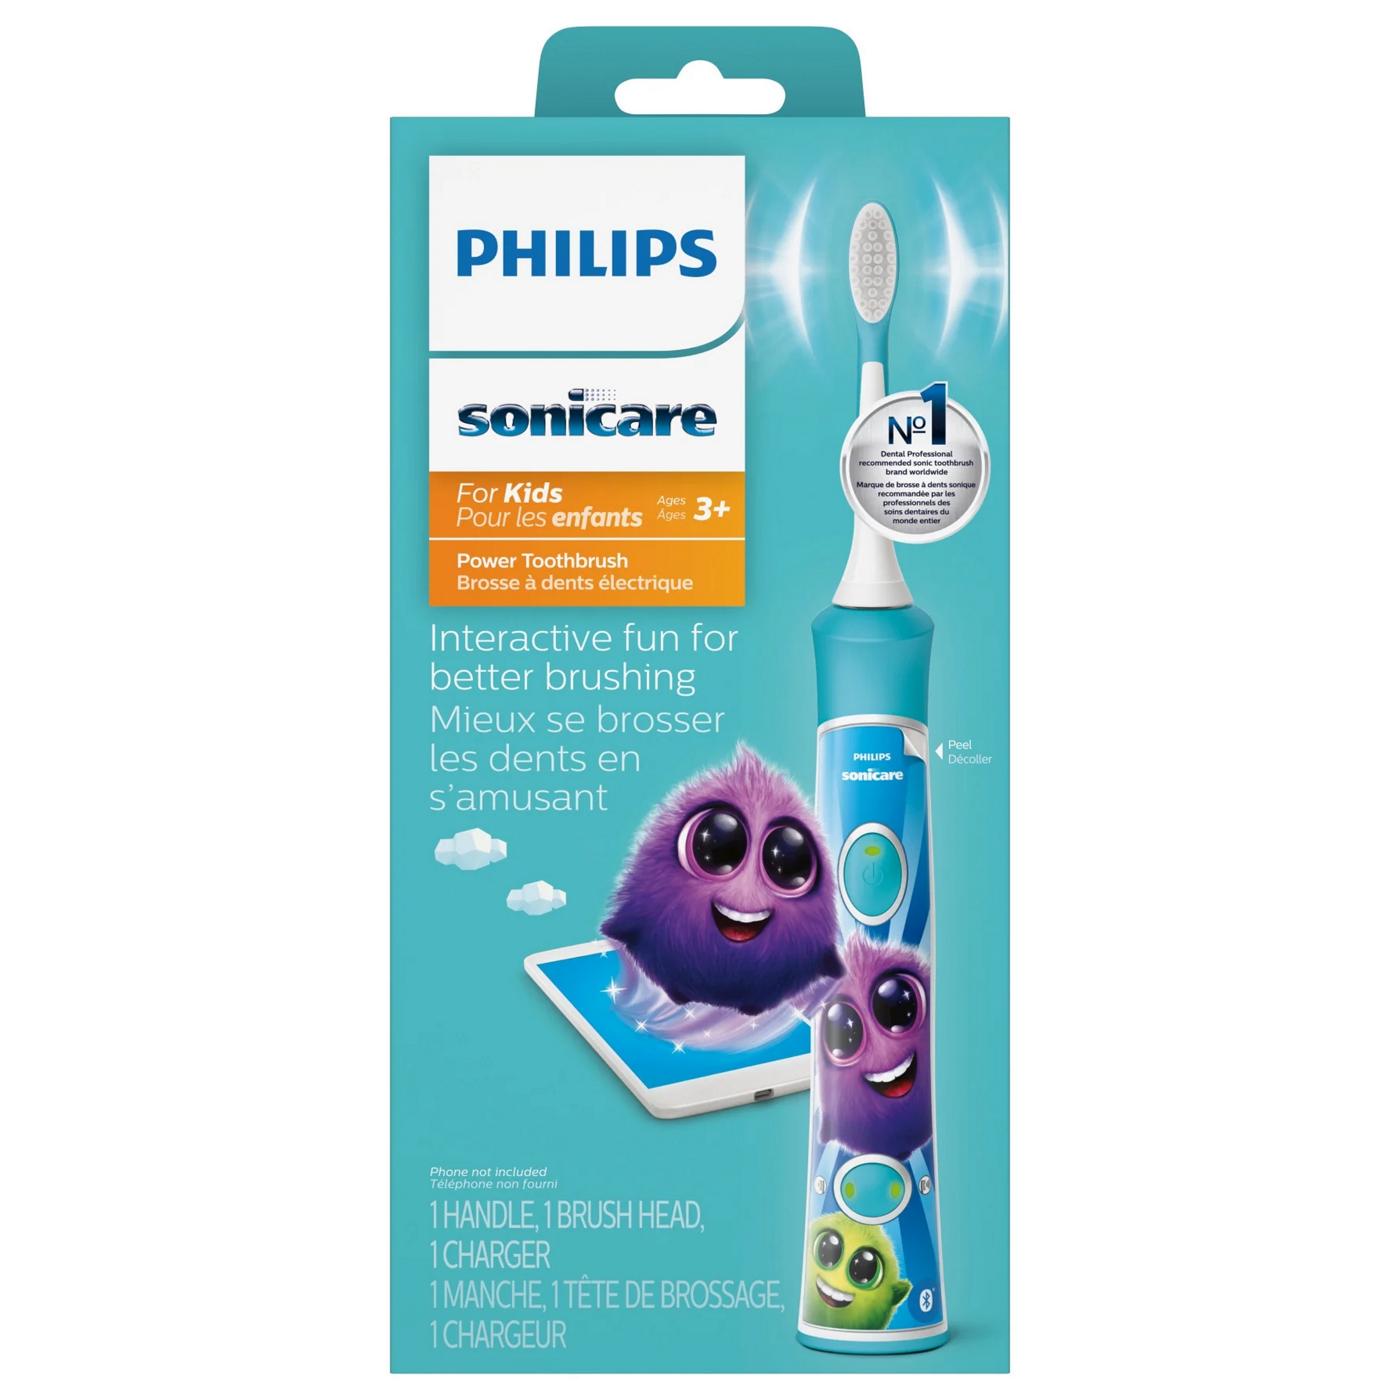 Philips Sonicare for Kids Powered Toothbrush; image 1 of 2